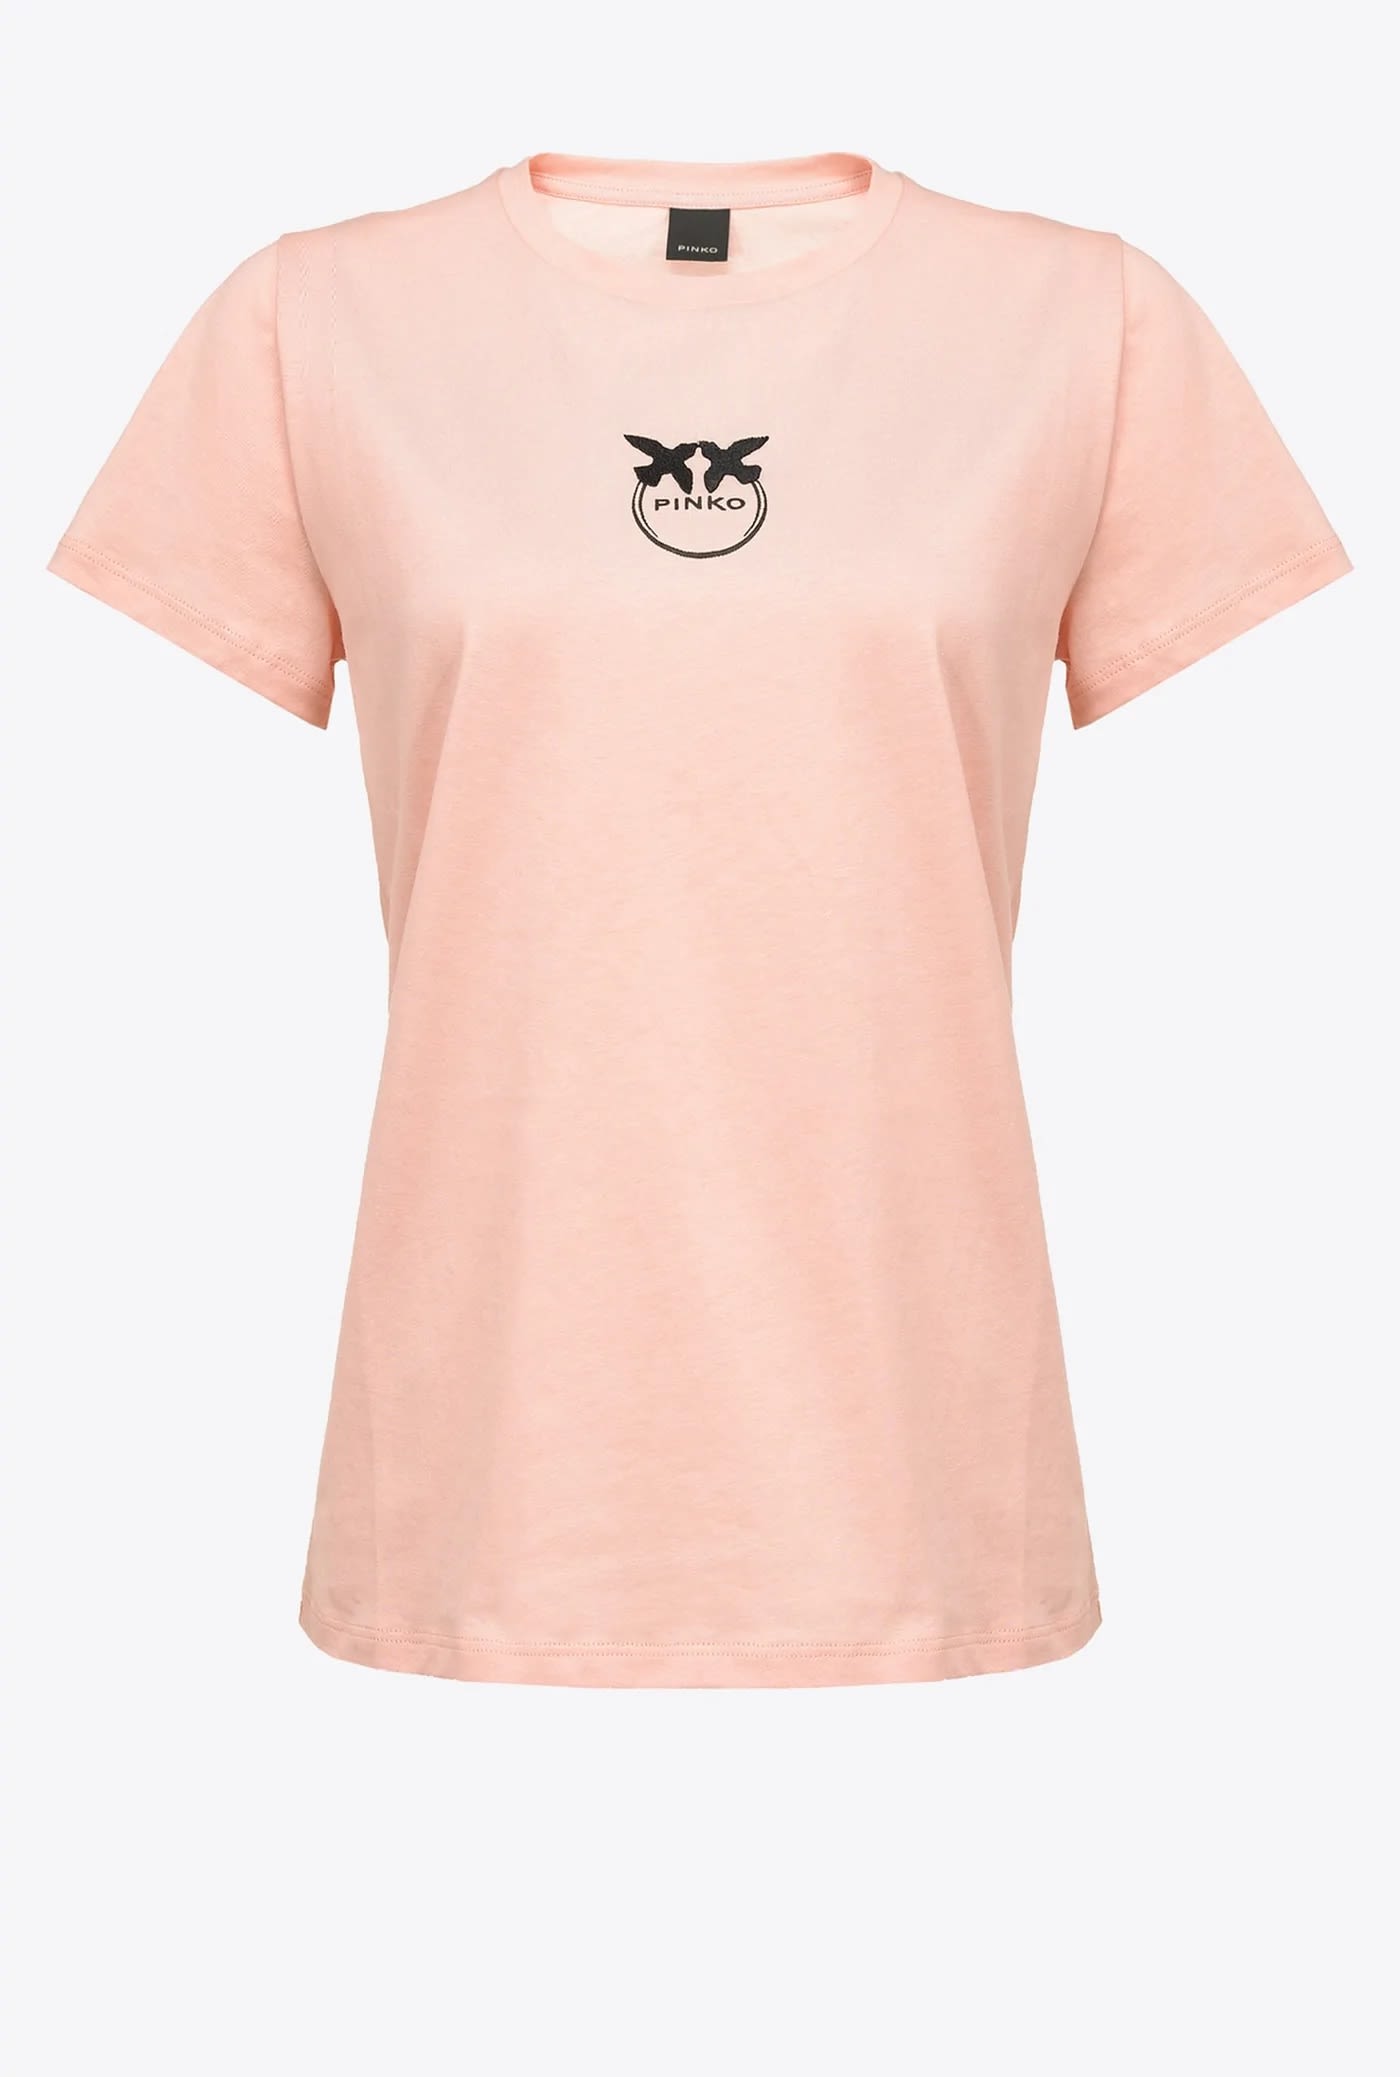 Pinko Bussolotto Tshirt In Pink